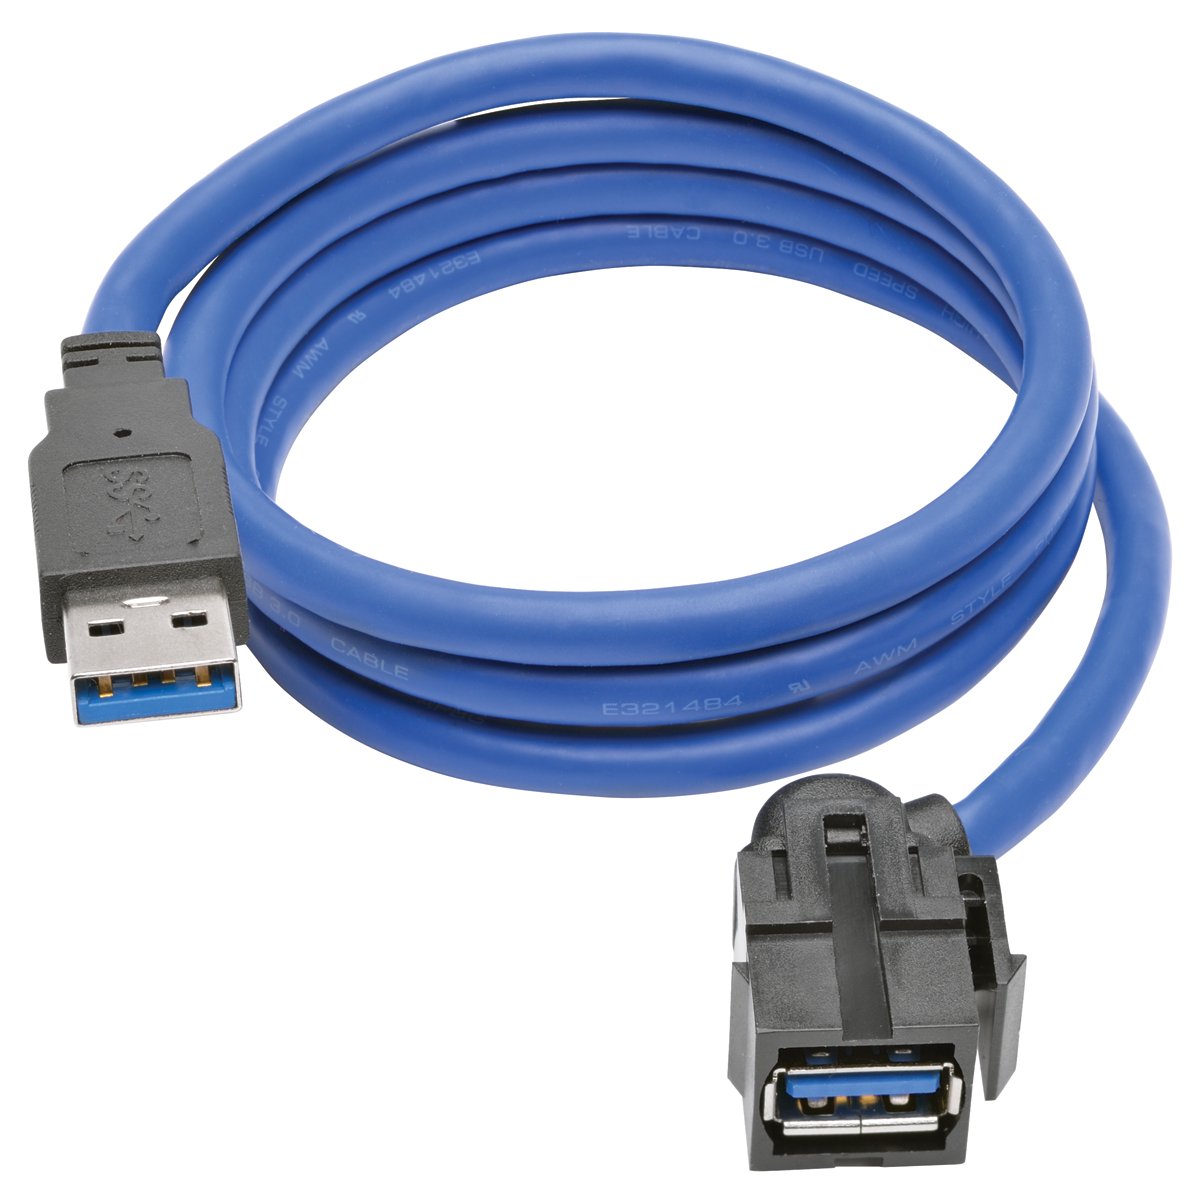 Book Cover Tripp Lite USB 3.0 SuperSpeed Keystone Jack Type-A Extension Cable (M/F), 3 ft. (U324-003-KJ)